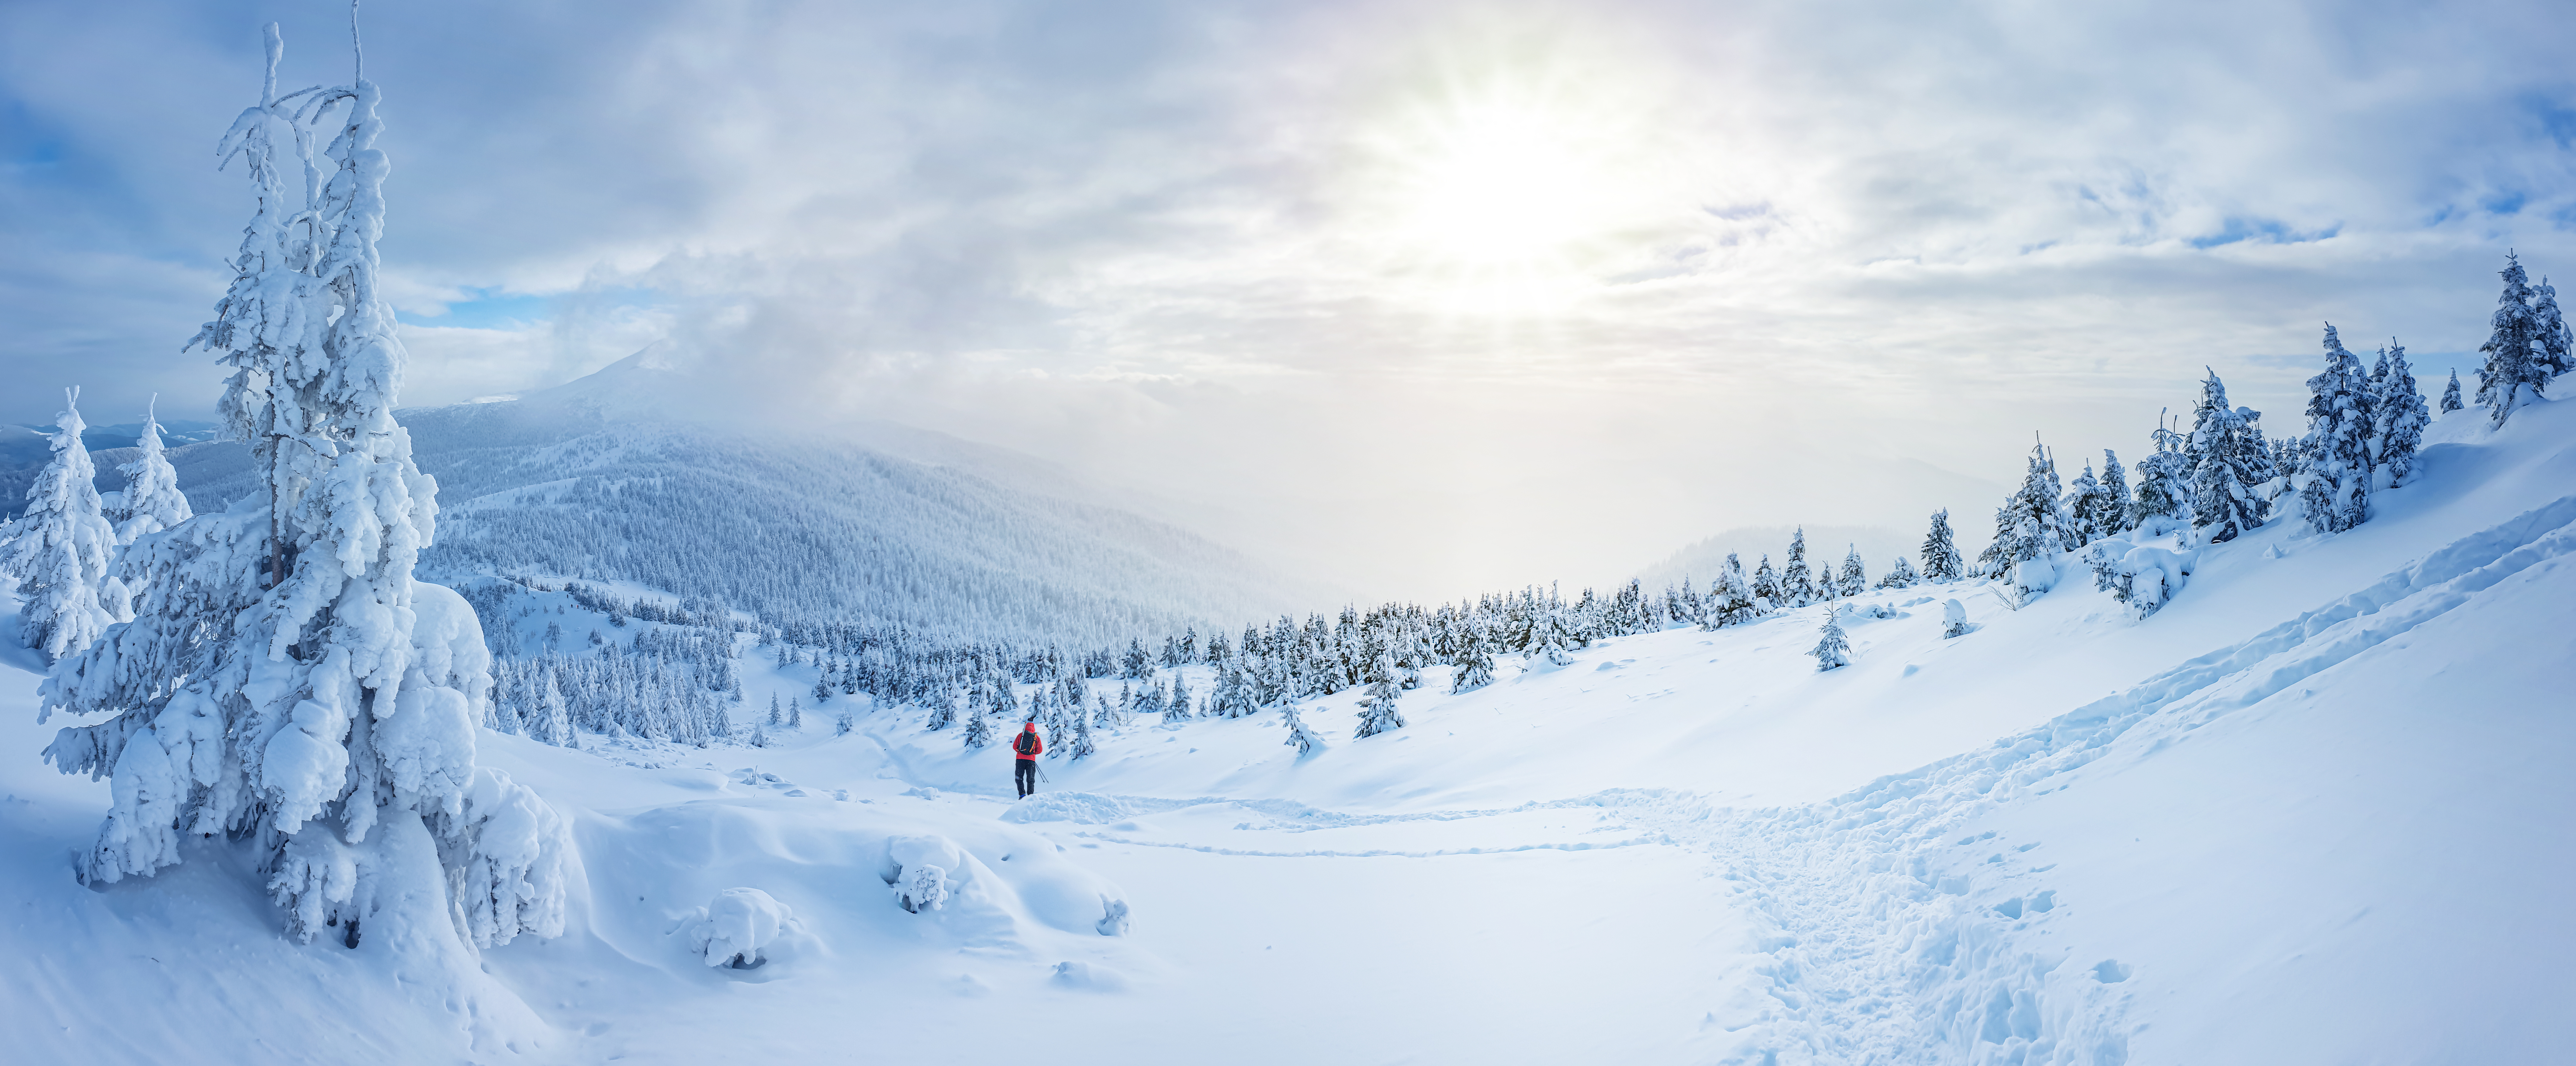 Panoramic landscape of a snowy forest in the mountains on a sunny winter day whis. Ukrainian Carpathians, near Mount Petros, there is one tourist.